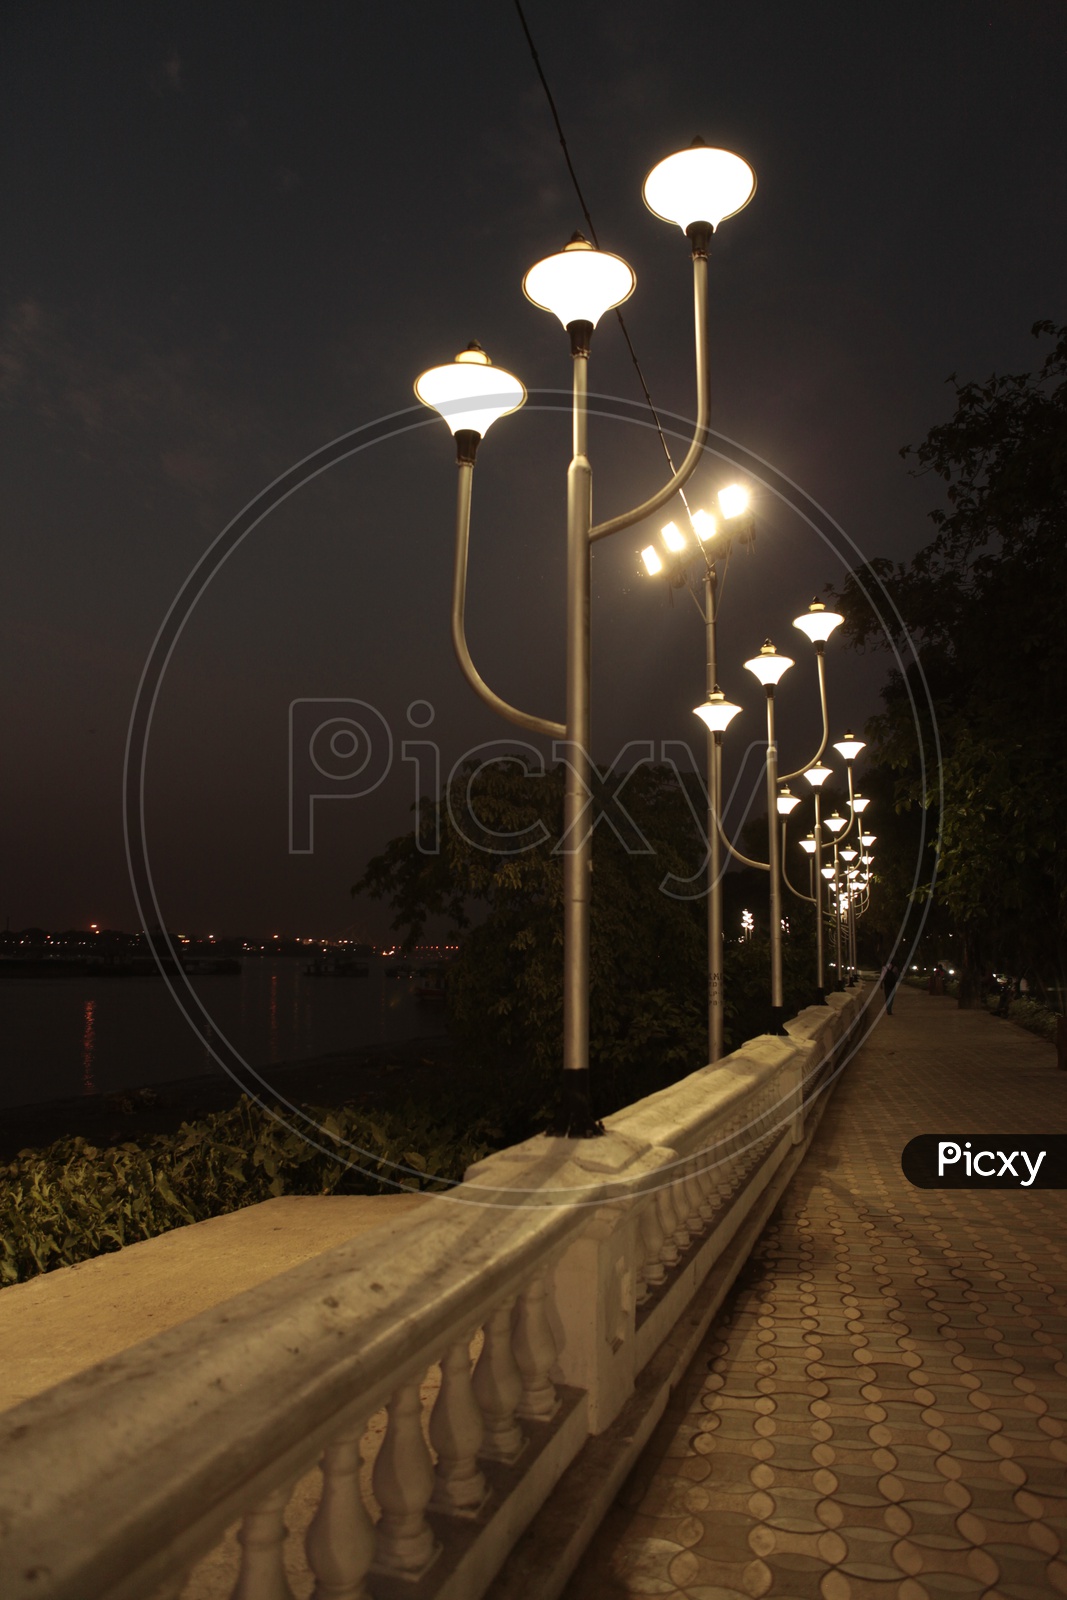 Street lights by the riverside in the night